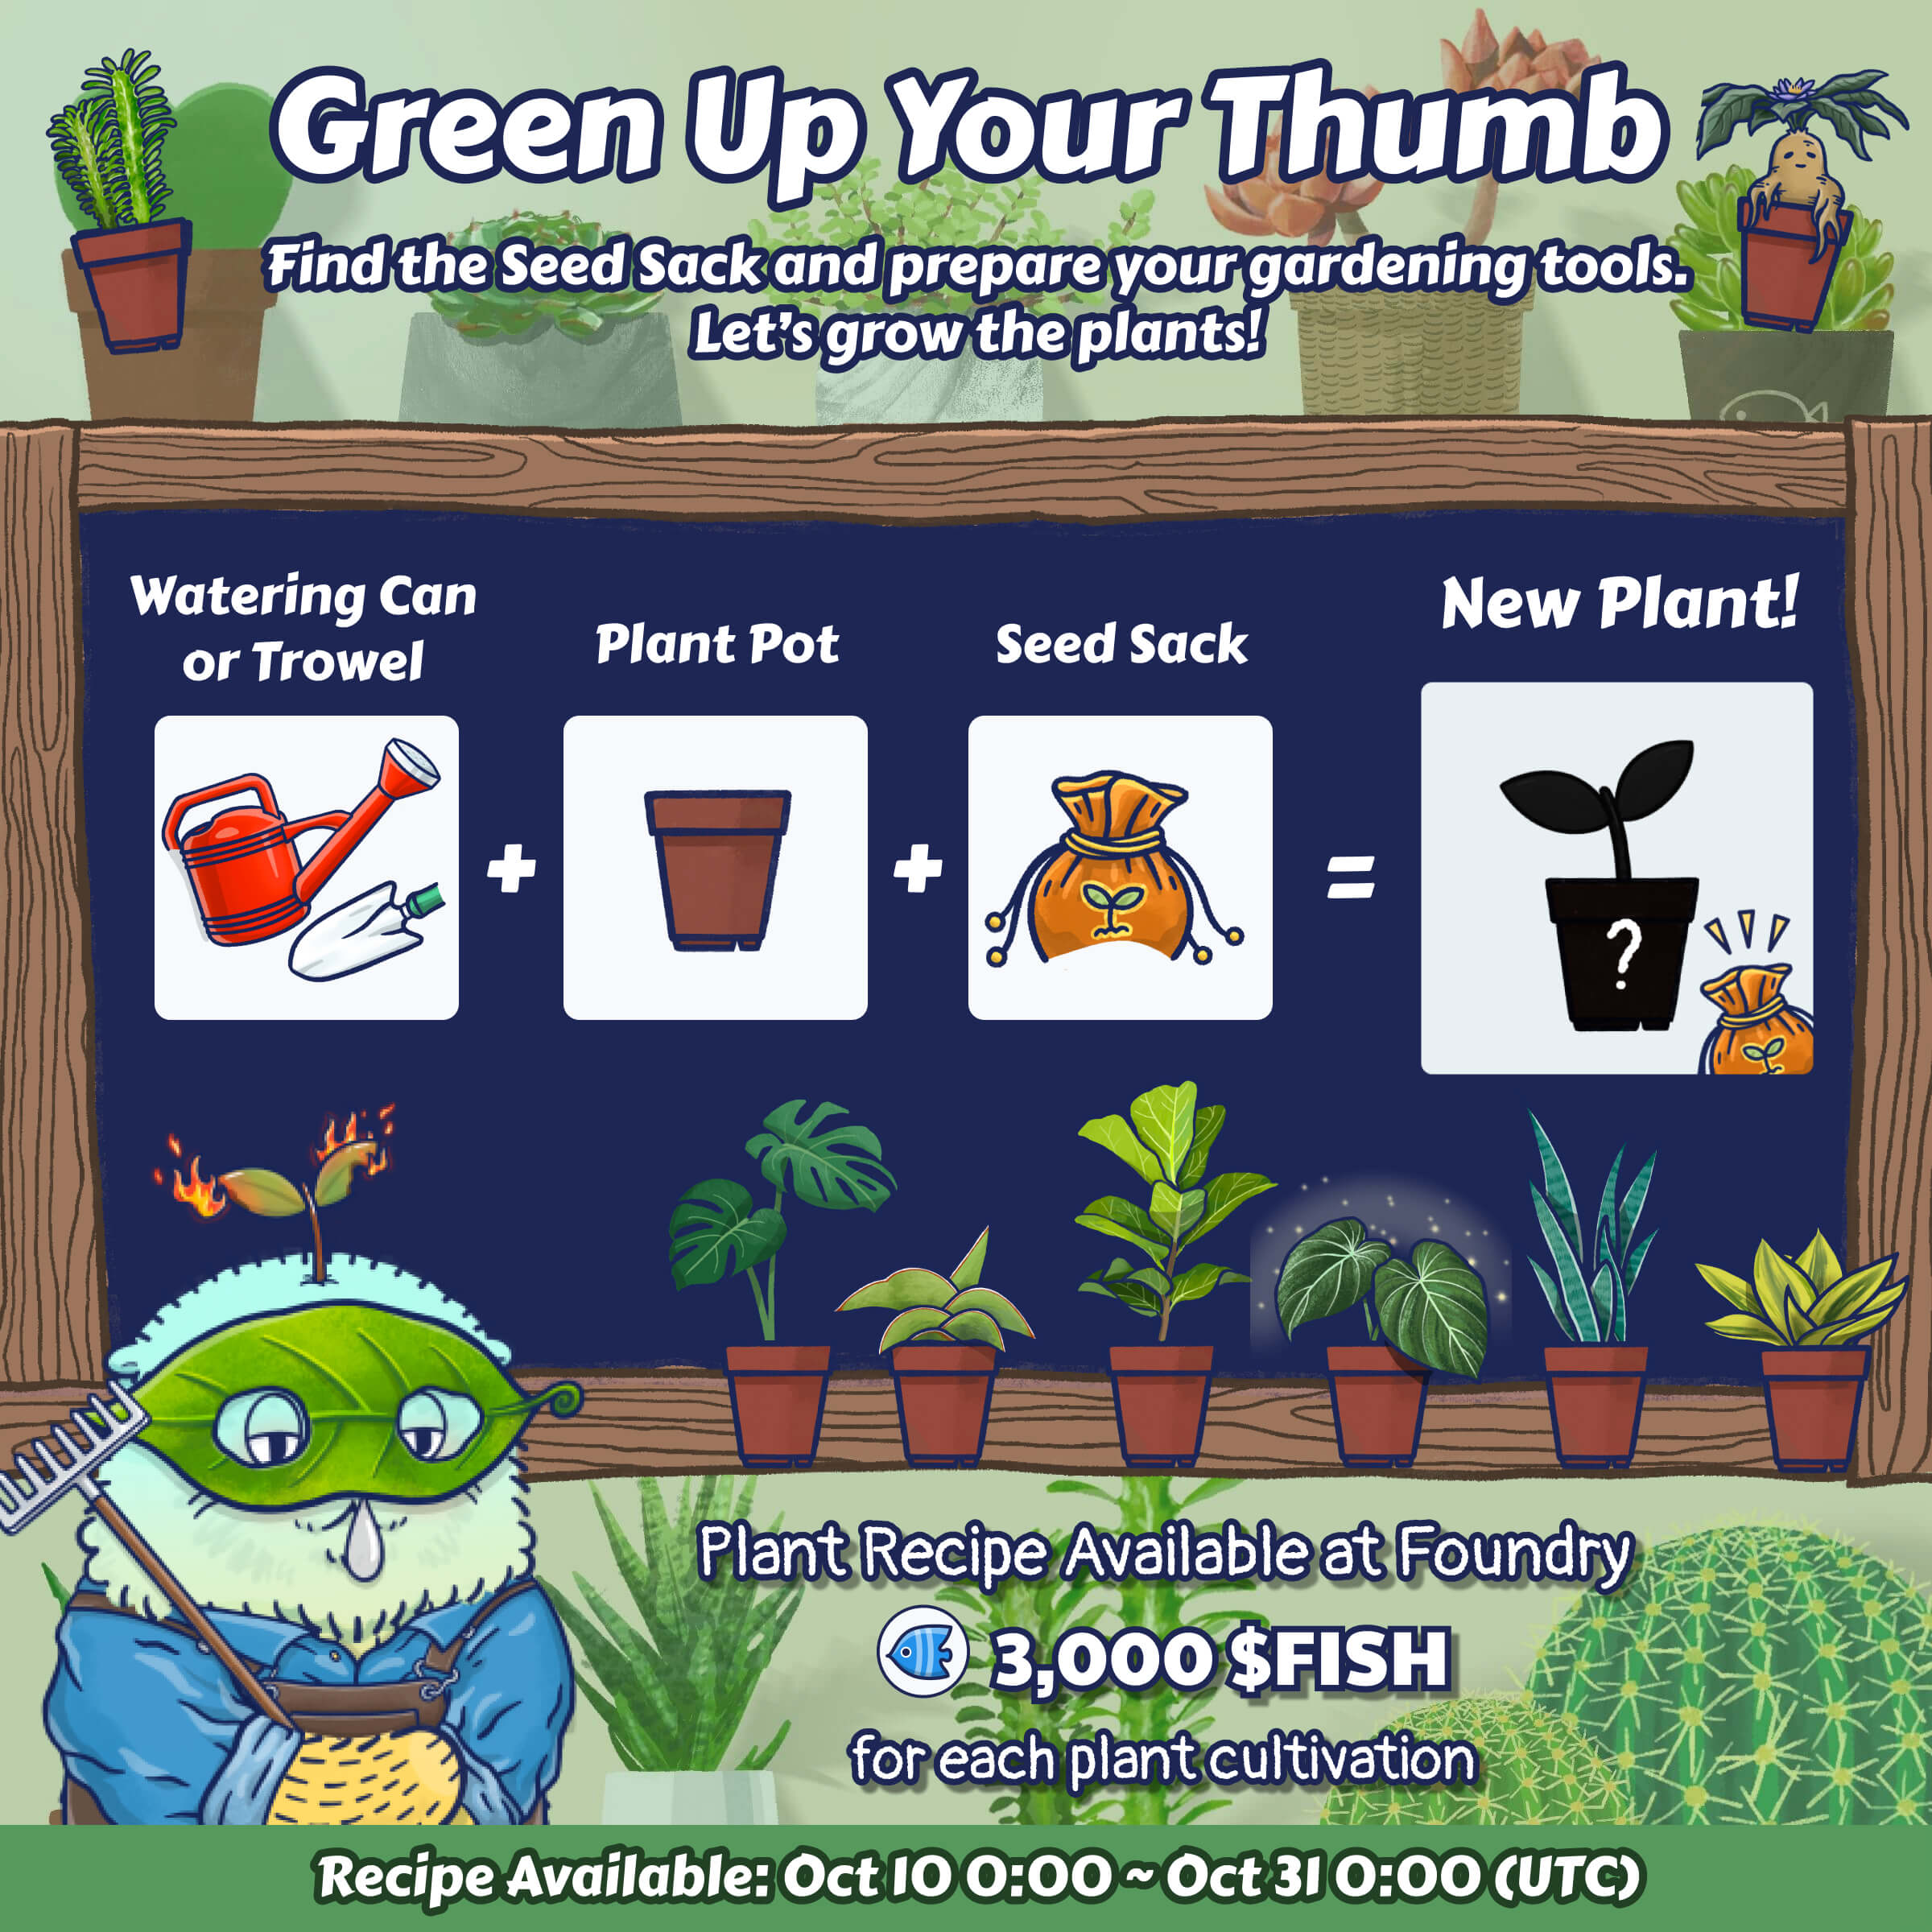 Green Up Your Thumb